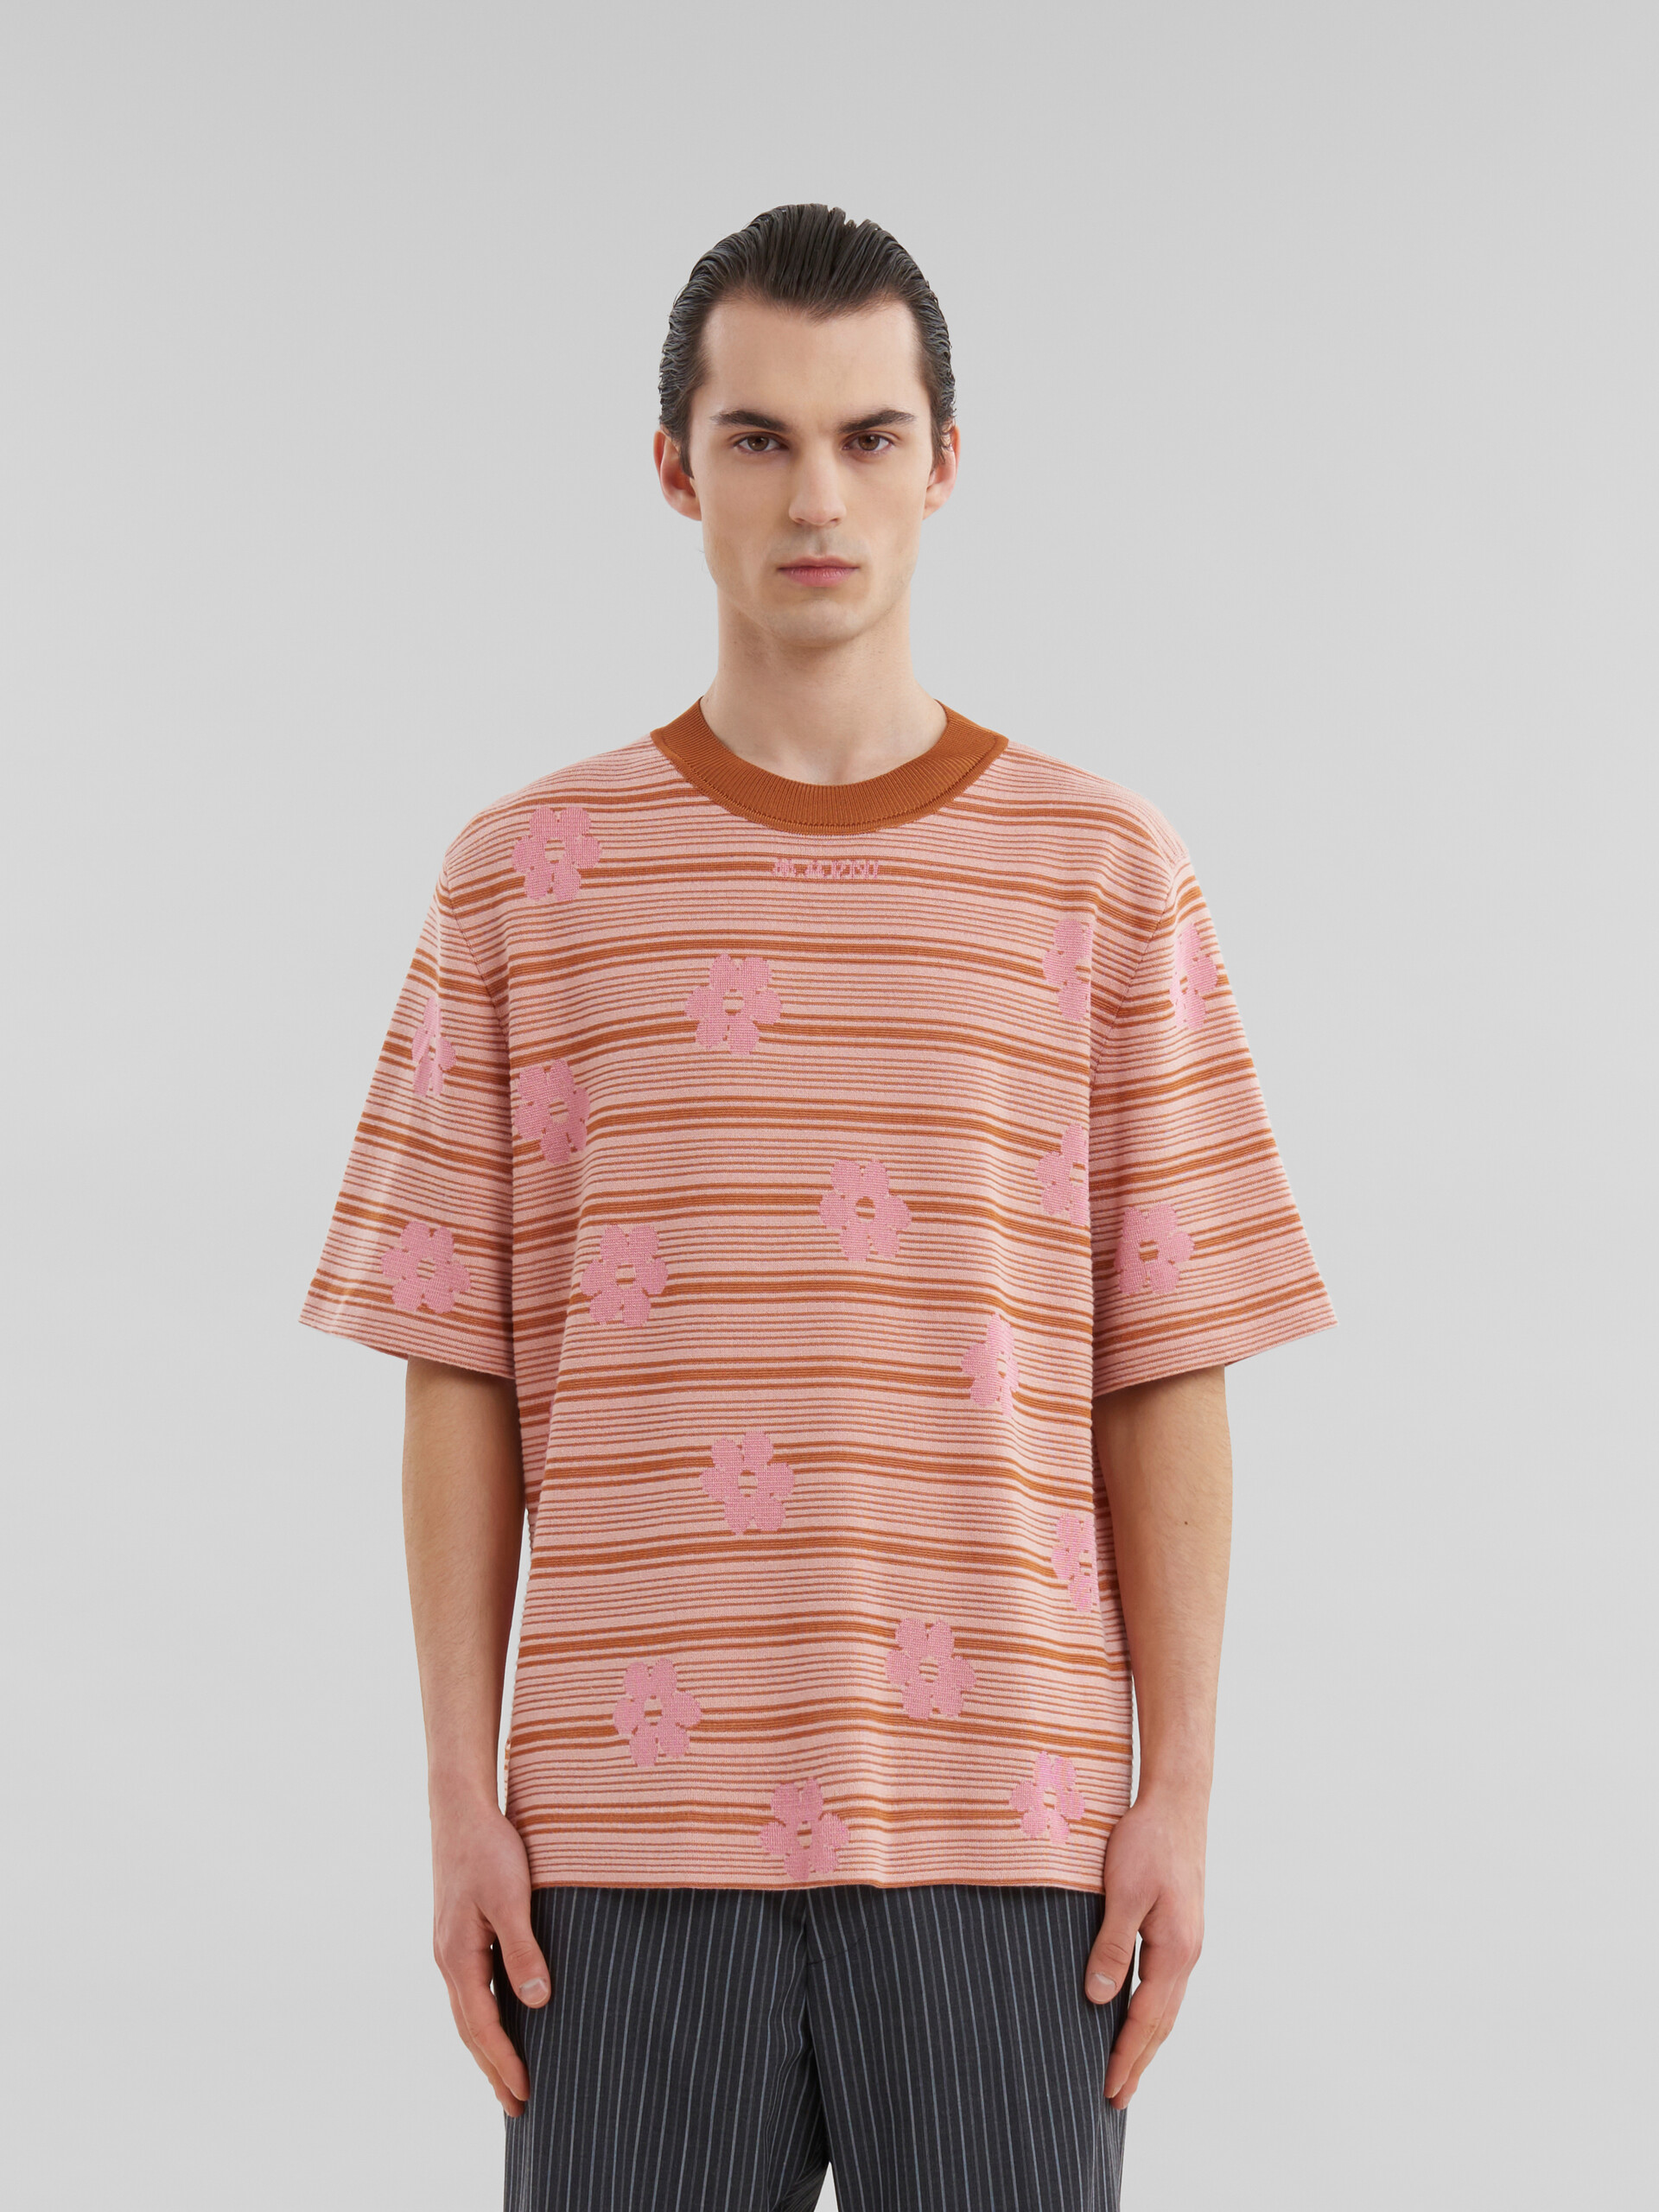 Pink cotton-viscose striped knit T-shirt with floral motif - Pullovers - Image 2